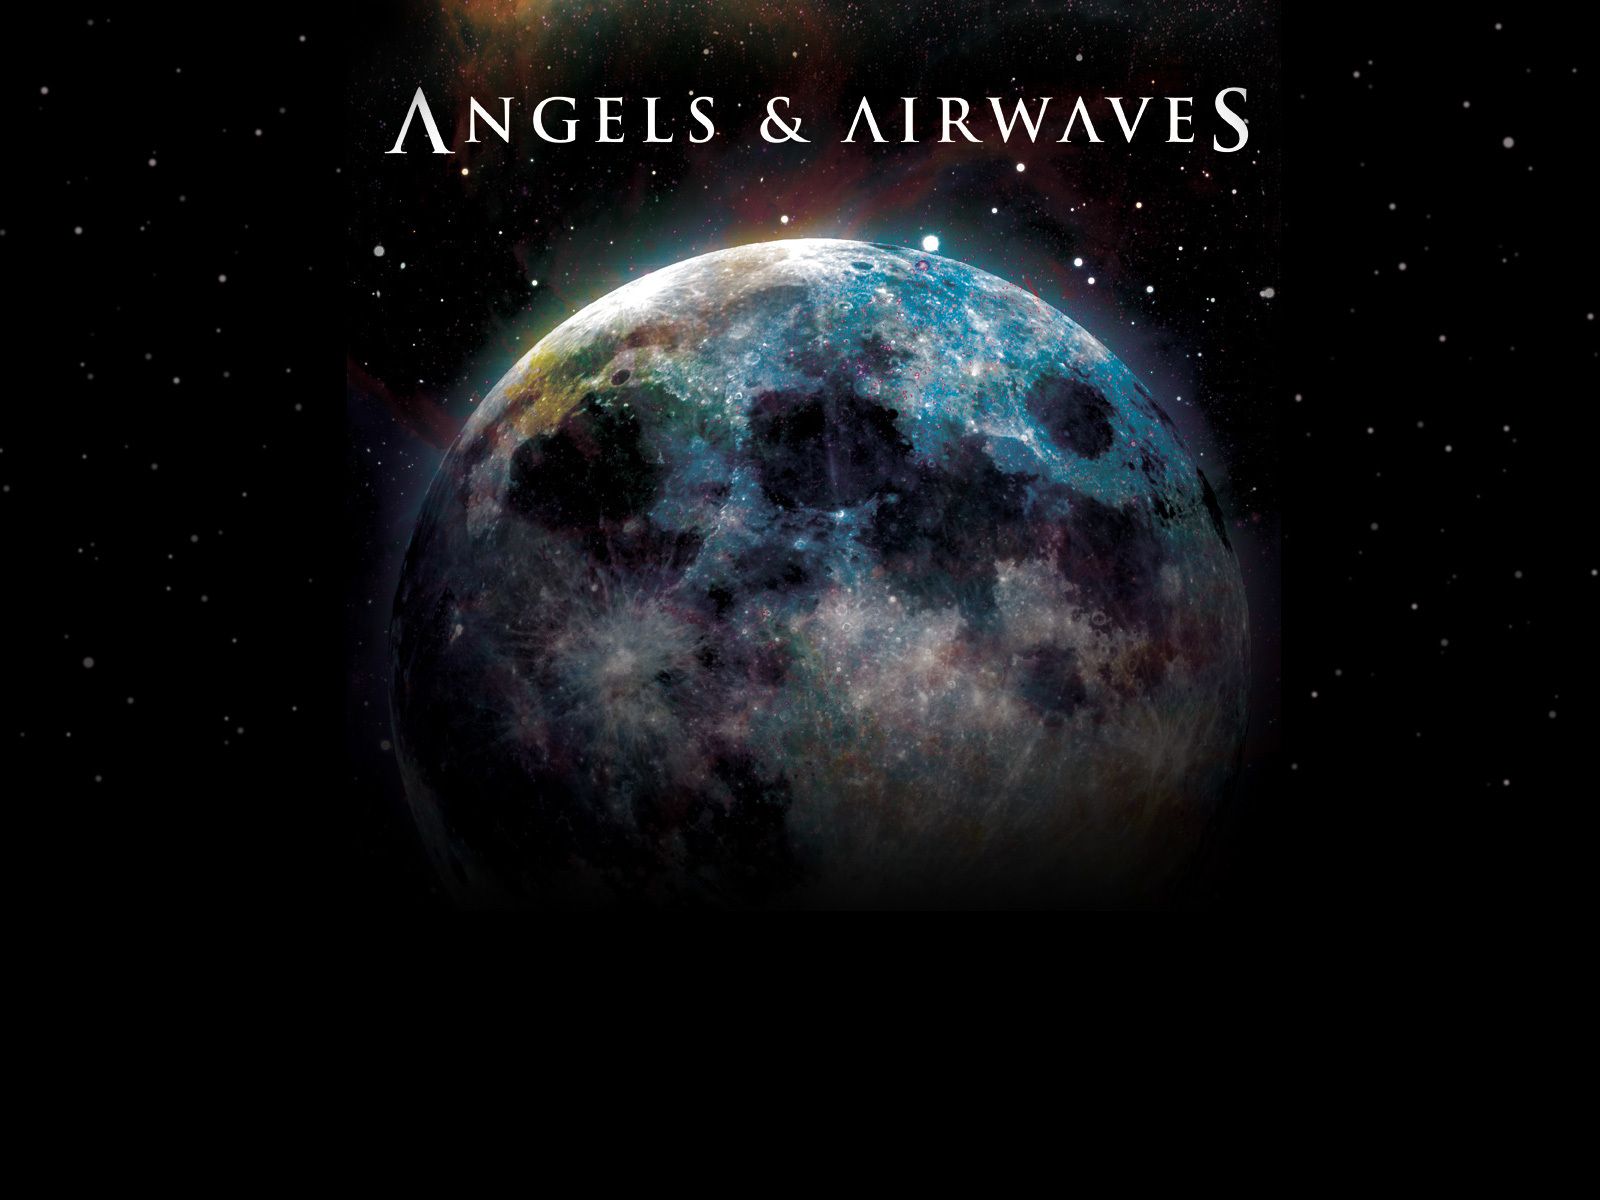 Angels And Airwaves Wallpapers